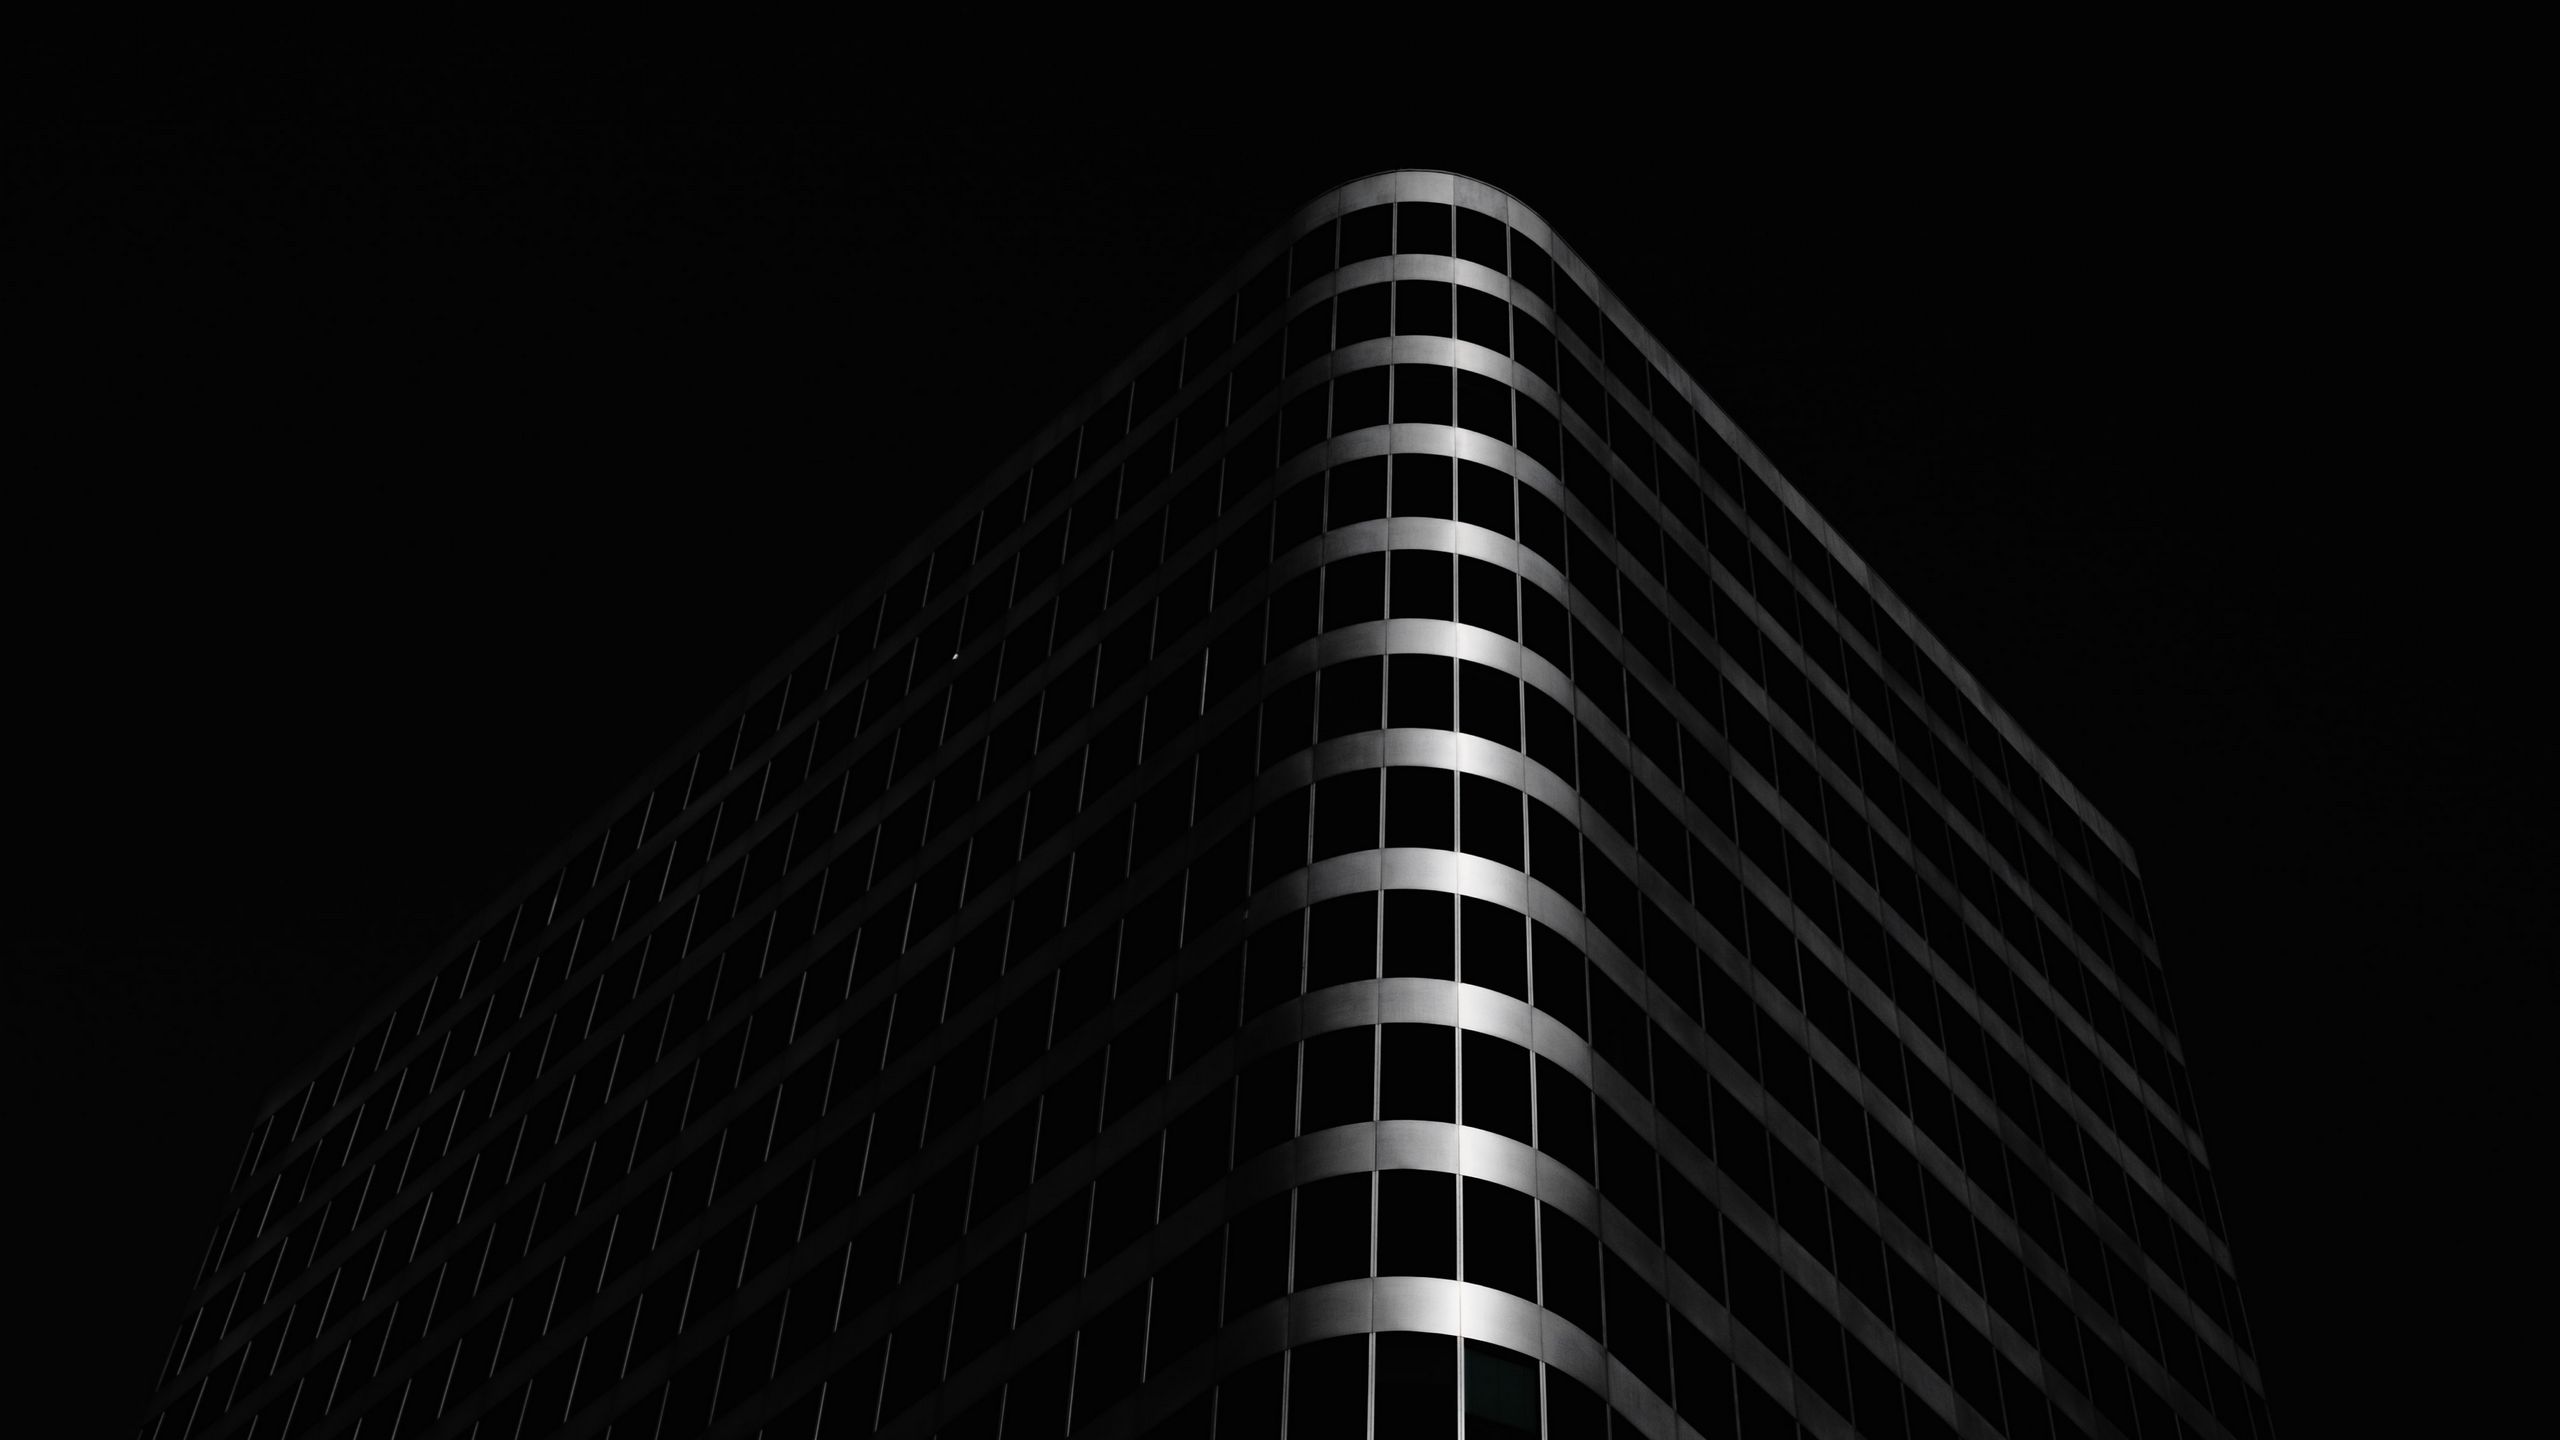 Download wallpapers 2560x1440 building, architecture, black, dark widescreen 16:9 hd backgrounds